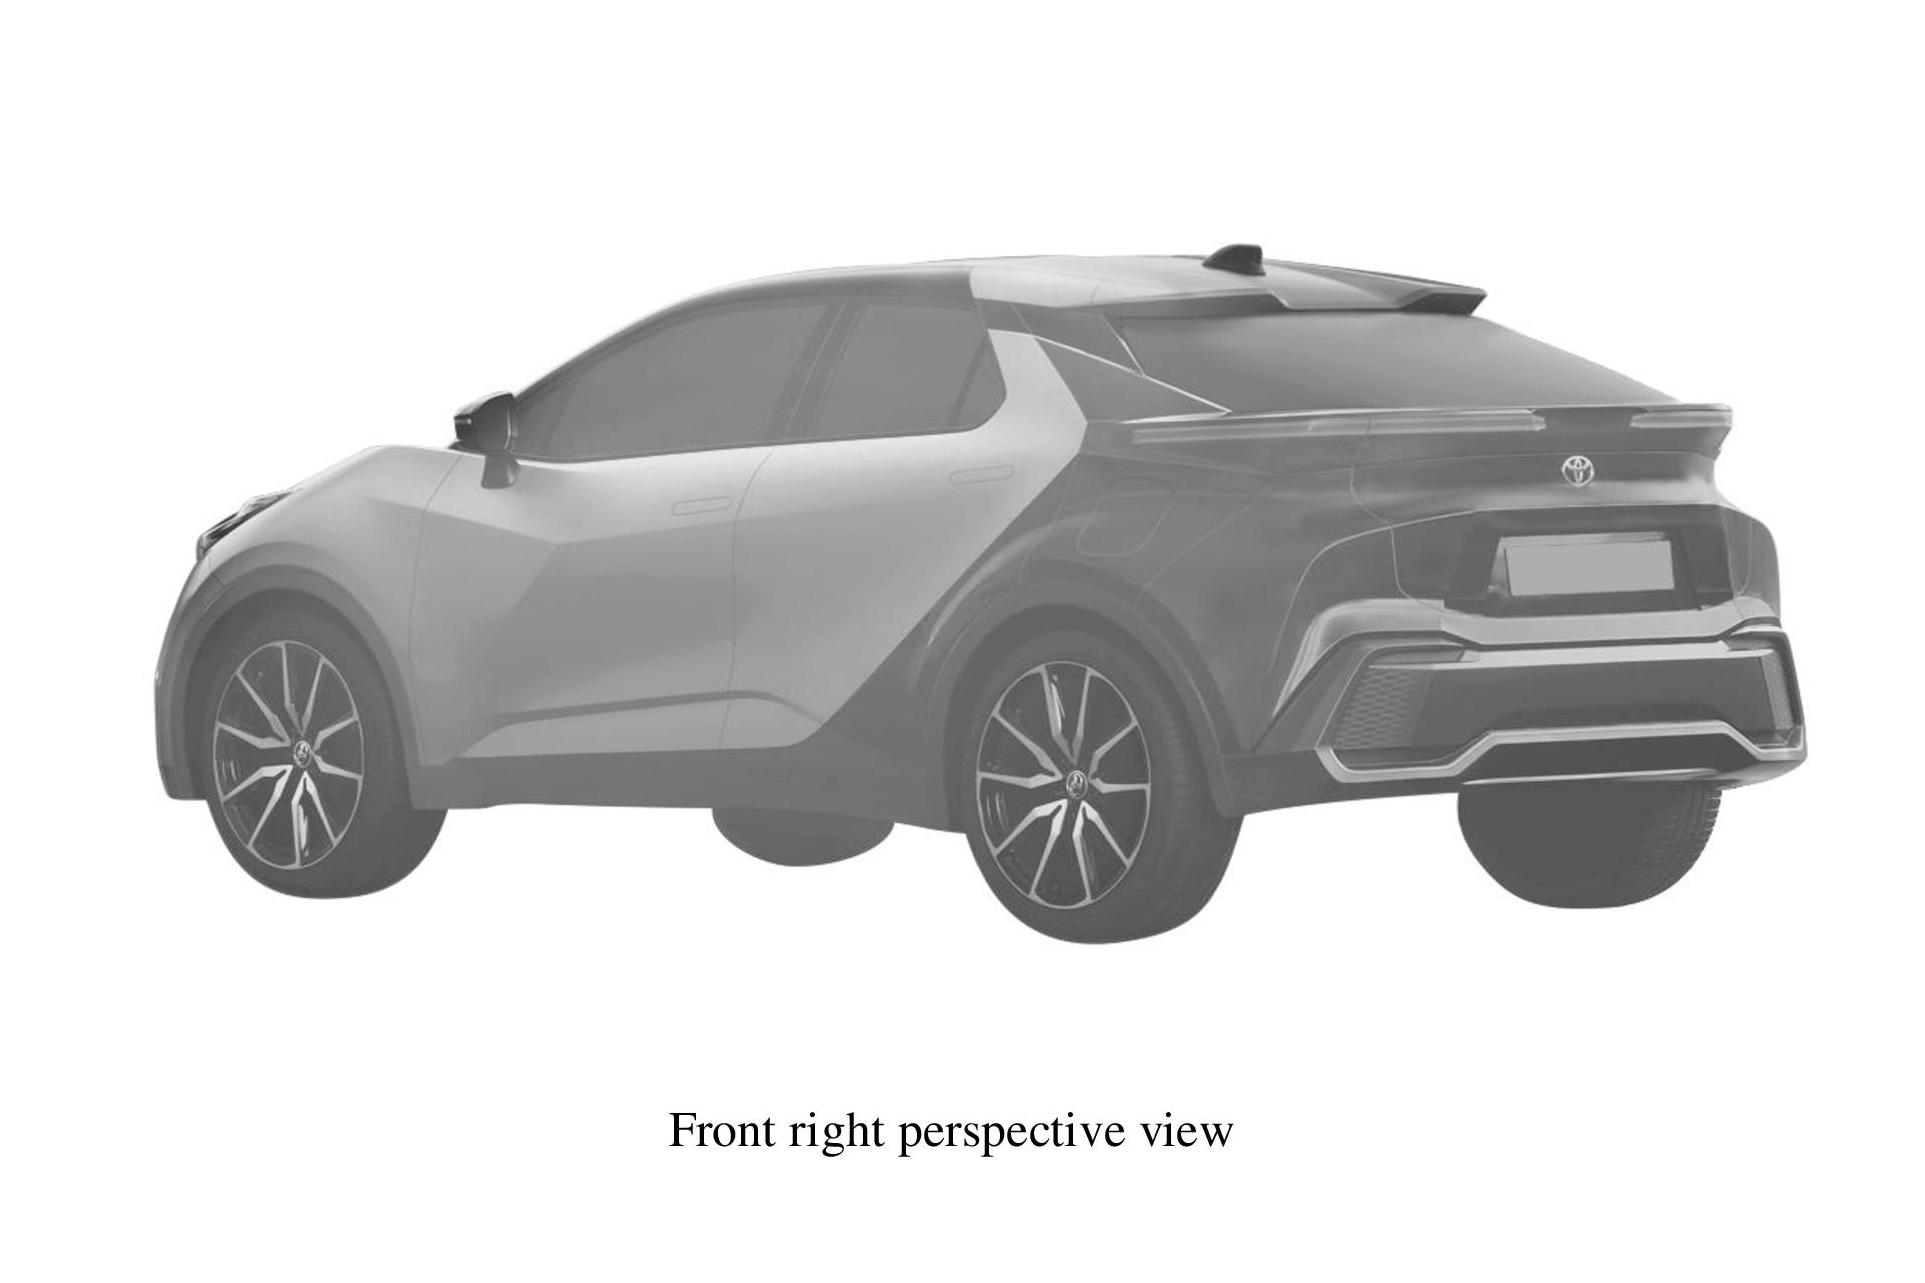 Toyota C-HR Models, Generations & Redesigns